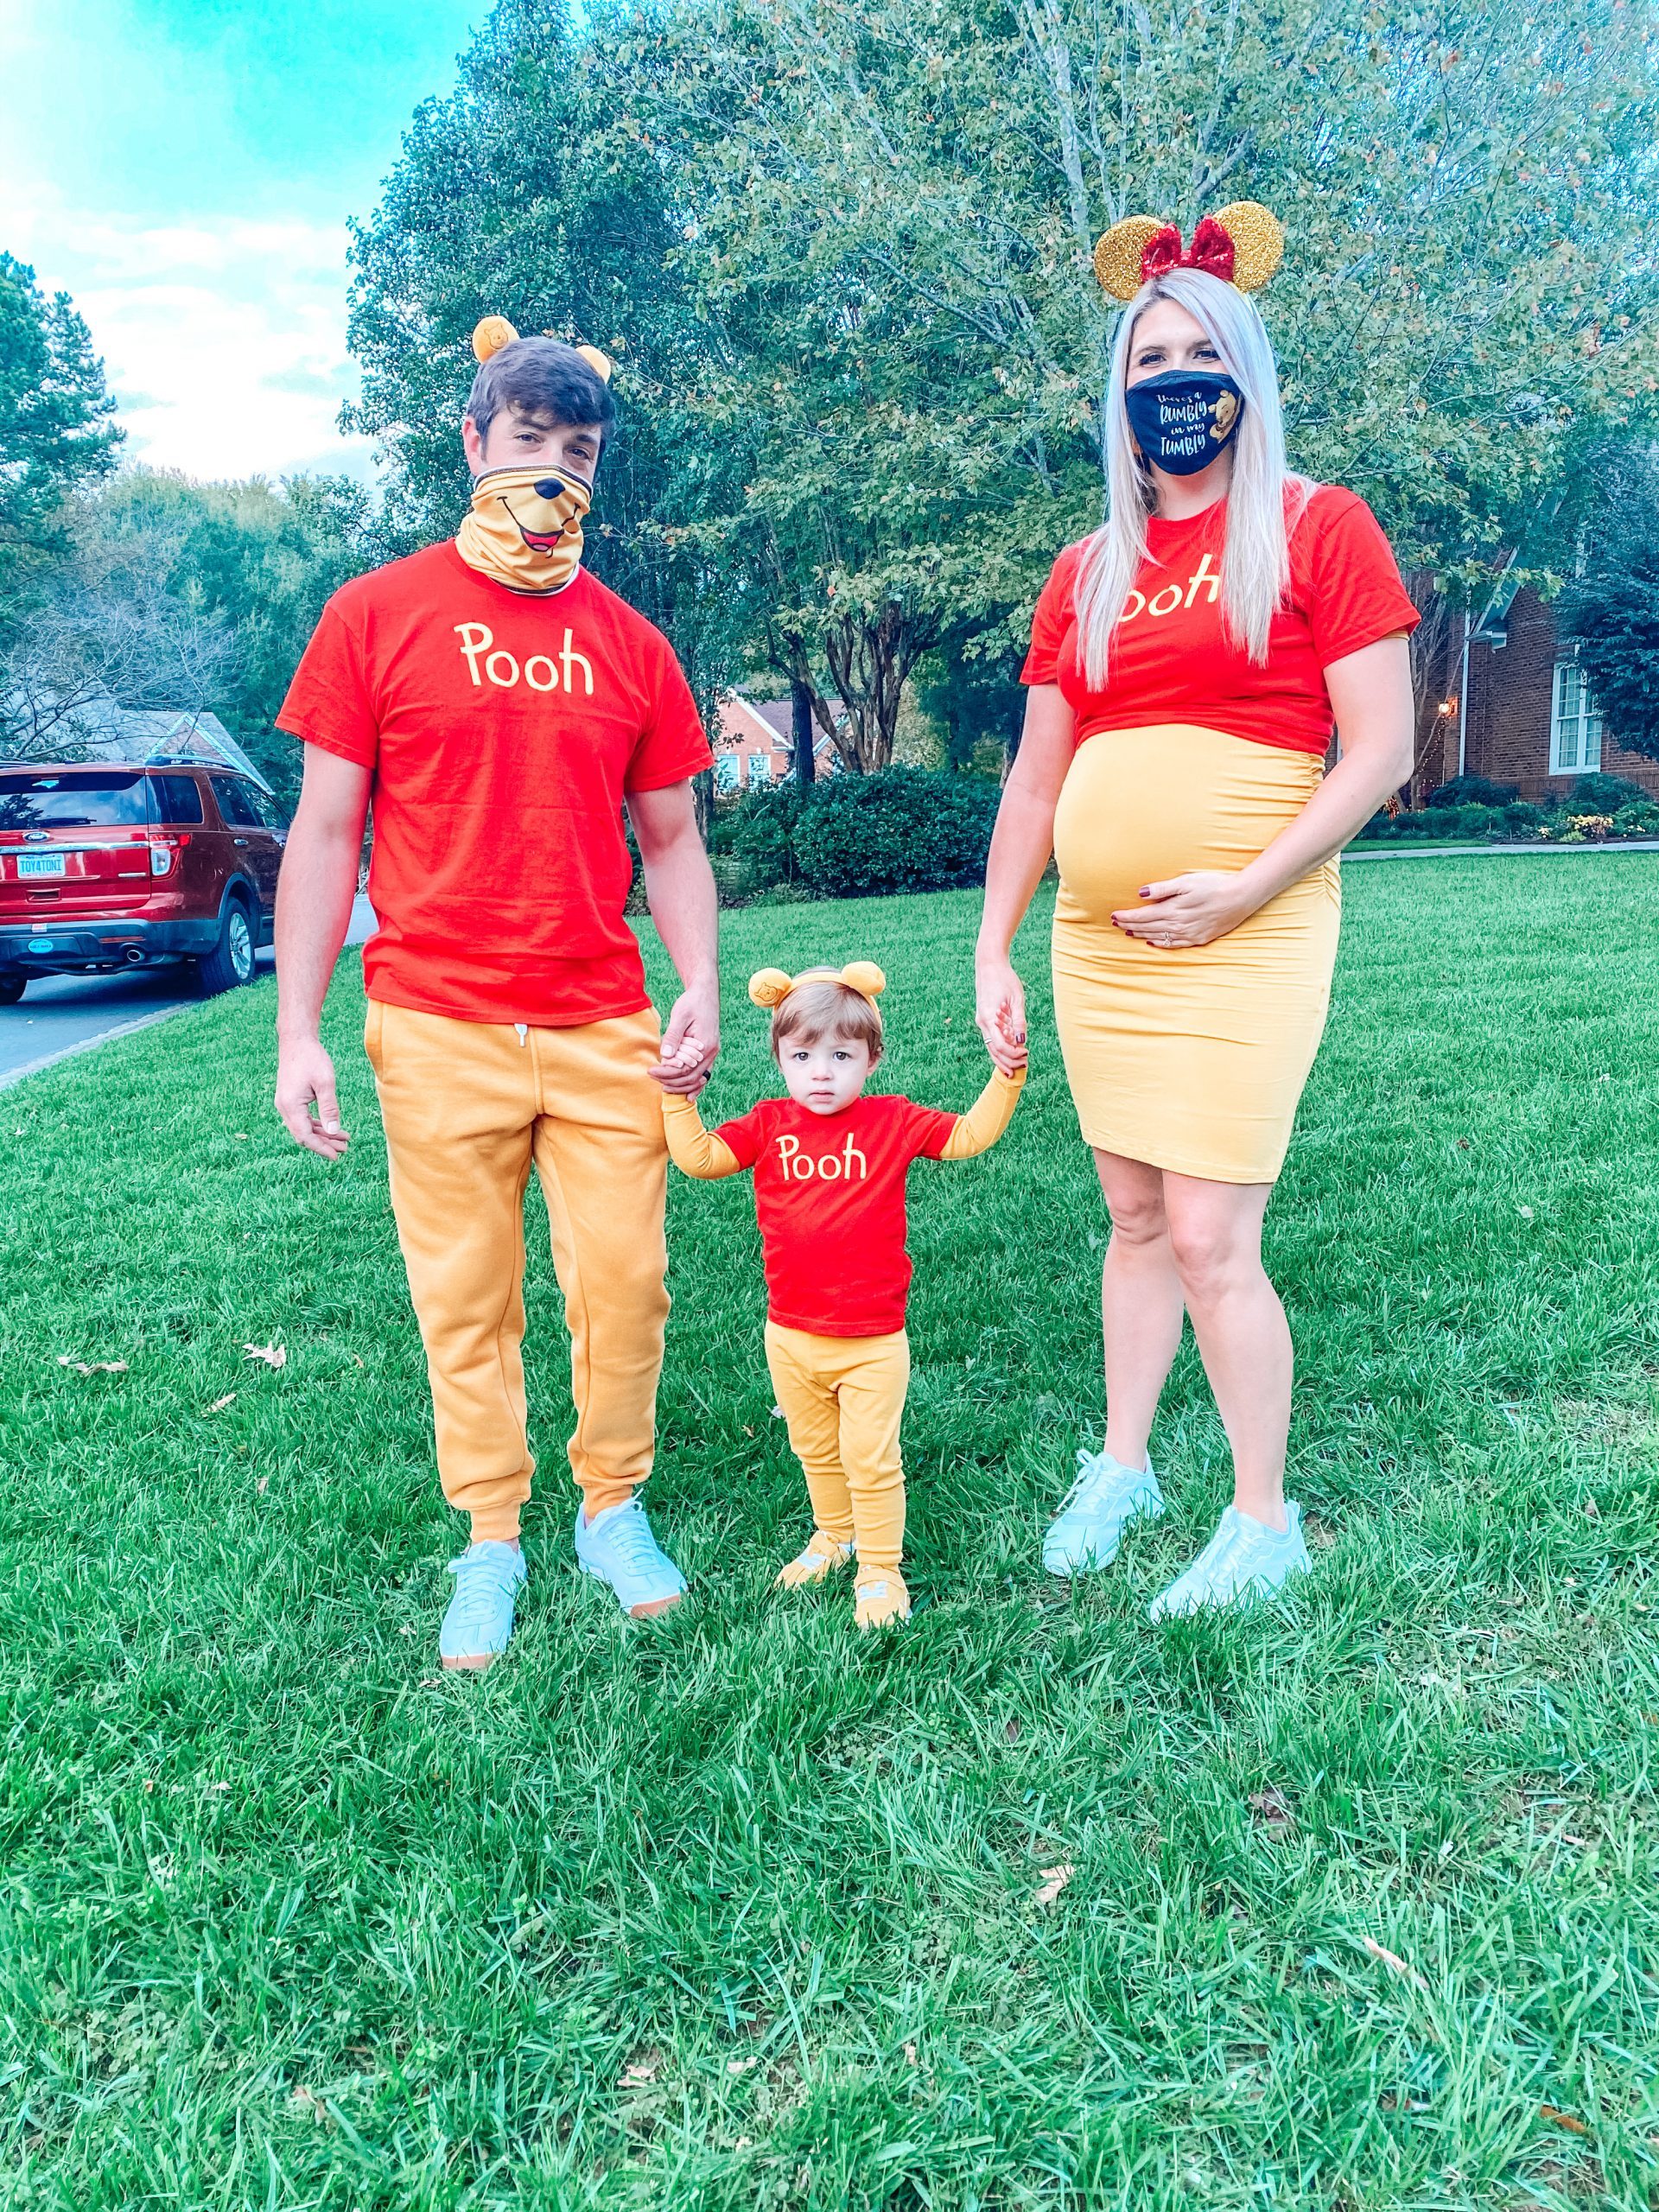 27 Pregnant Halloween Costumes for 2022: Creative Pregnancy Costumes